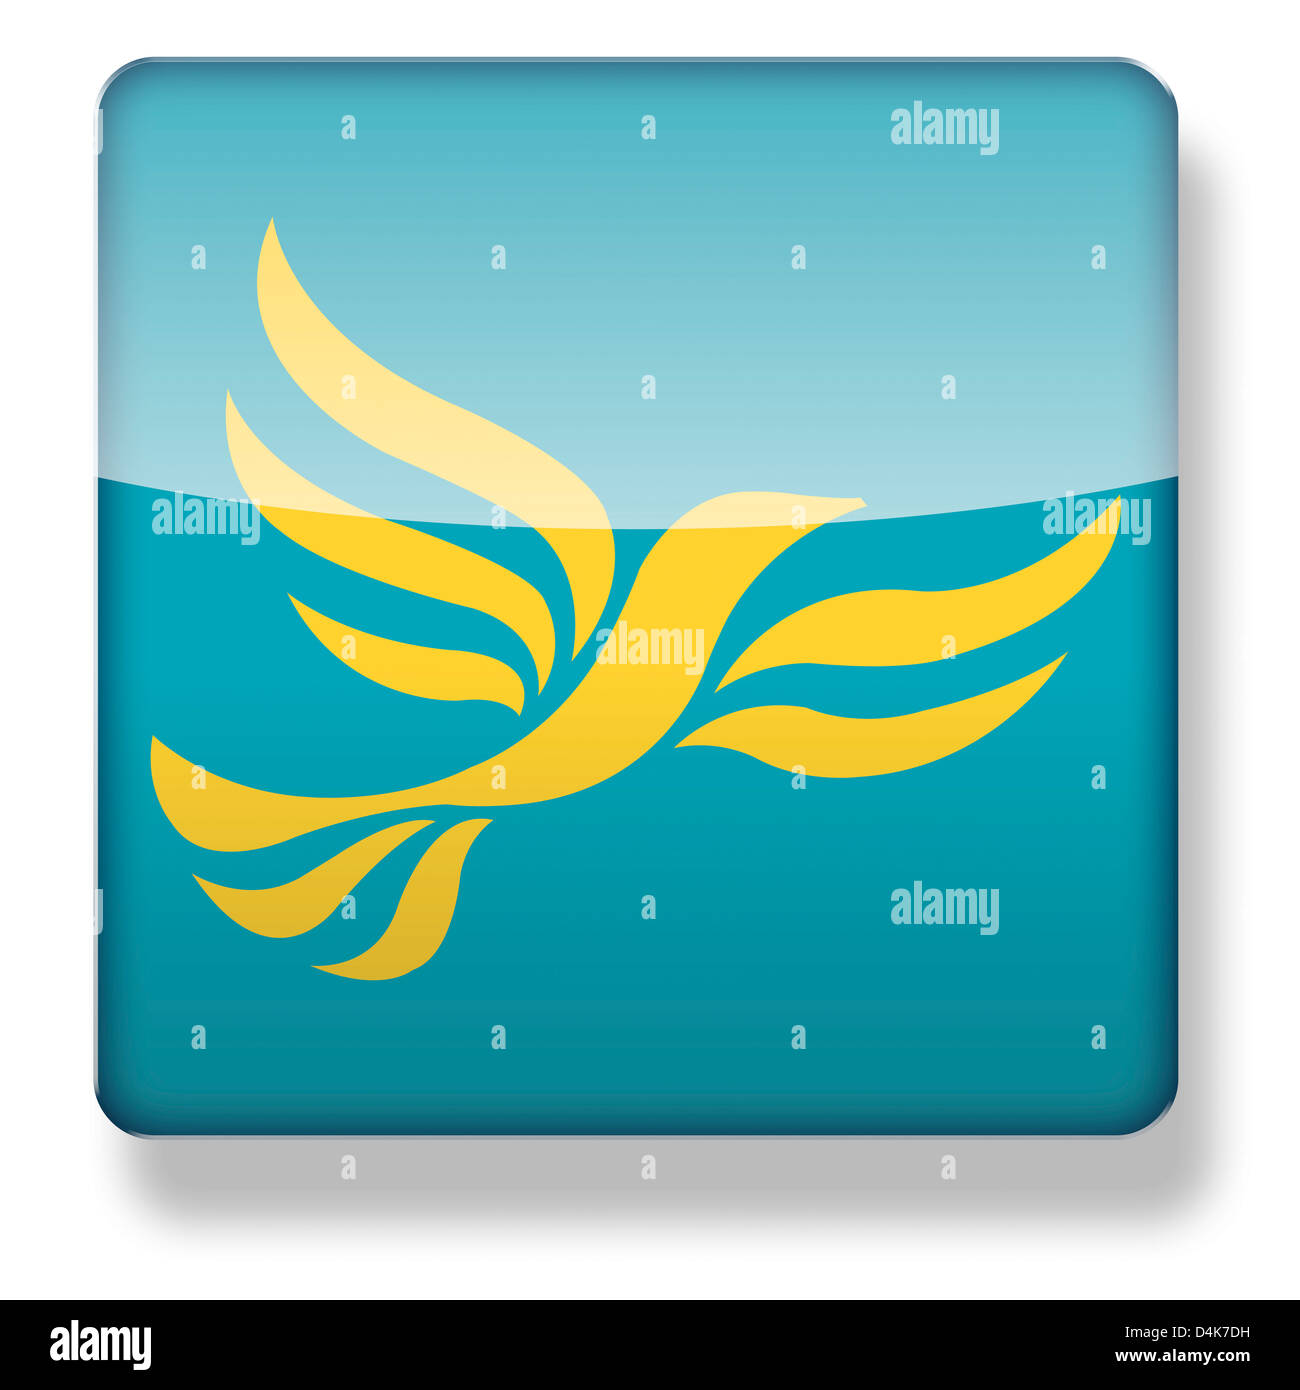 Liberal Democrats Party logo as an app icon. Clipping path included. Stock Photo